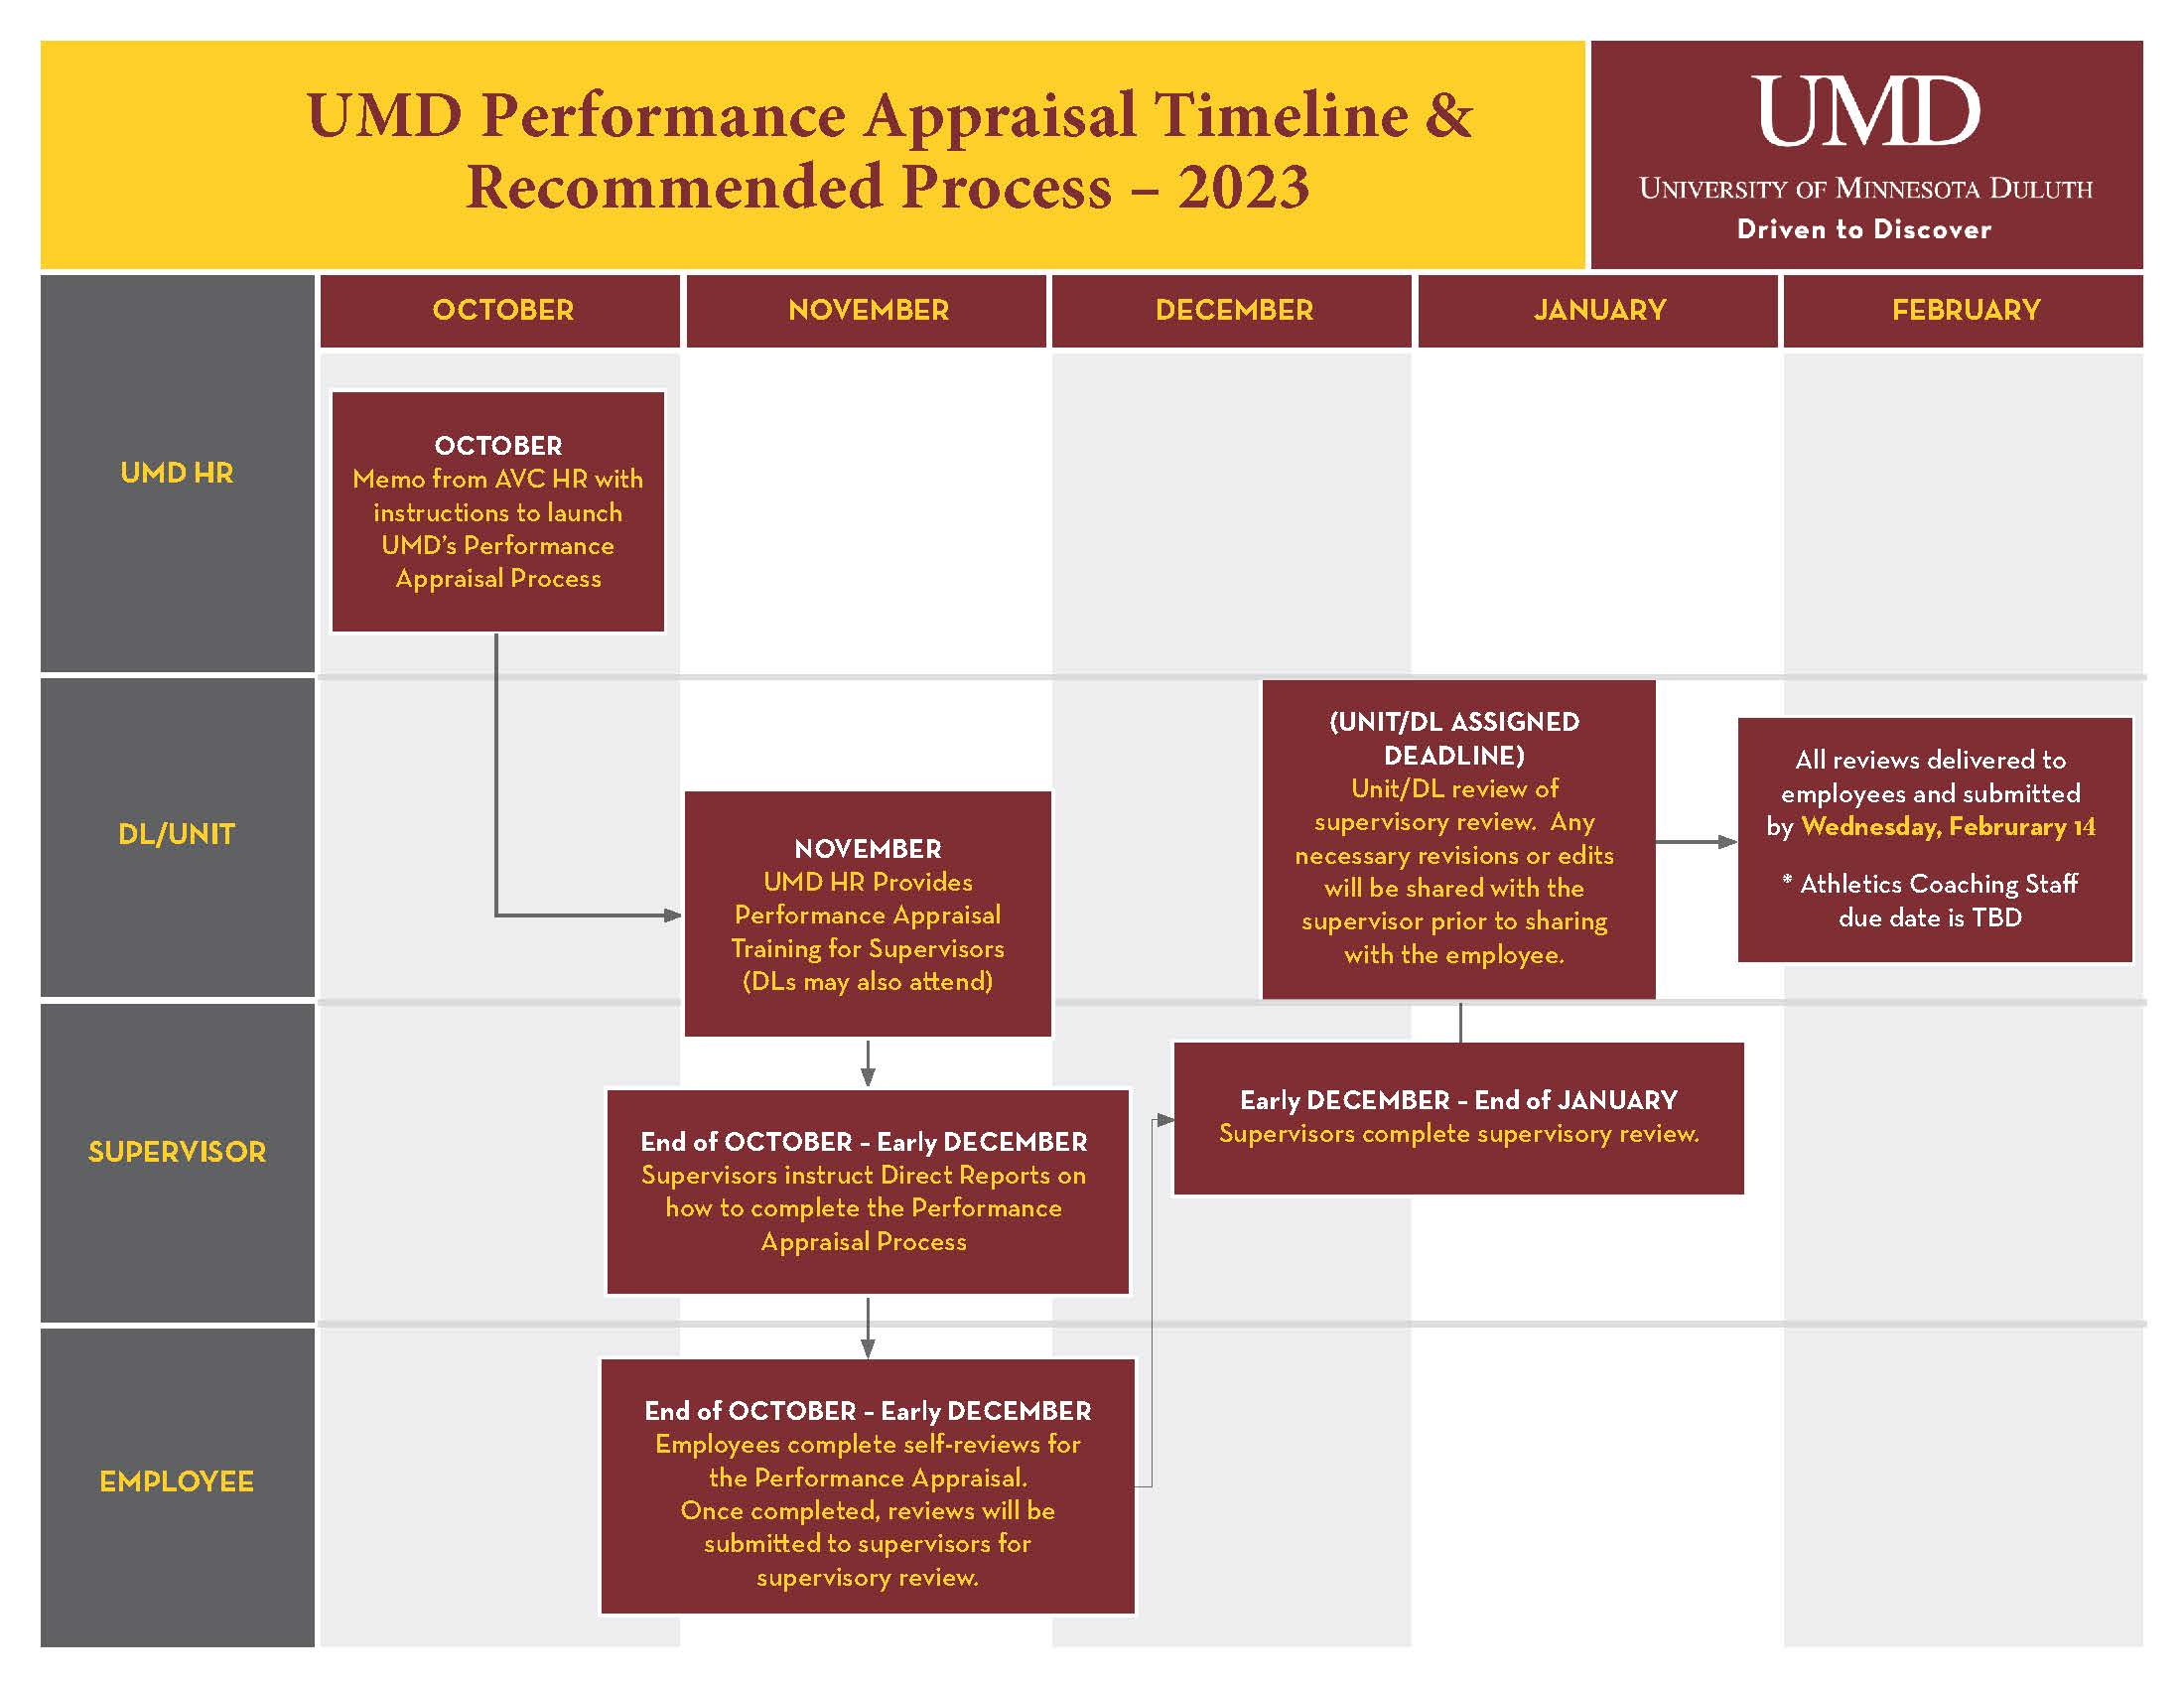 Performance Review Timeline 2023